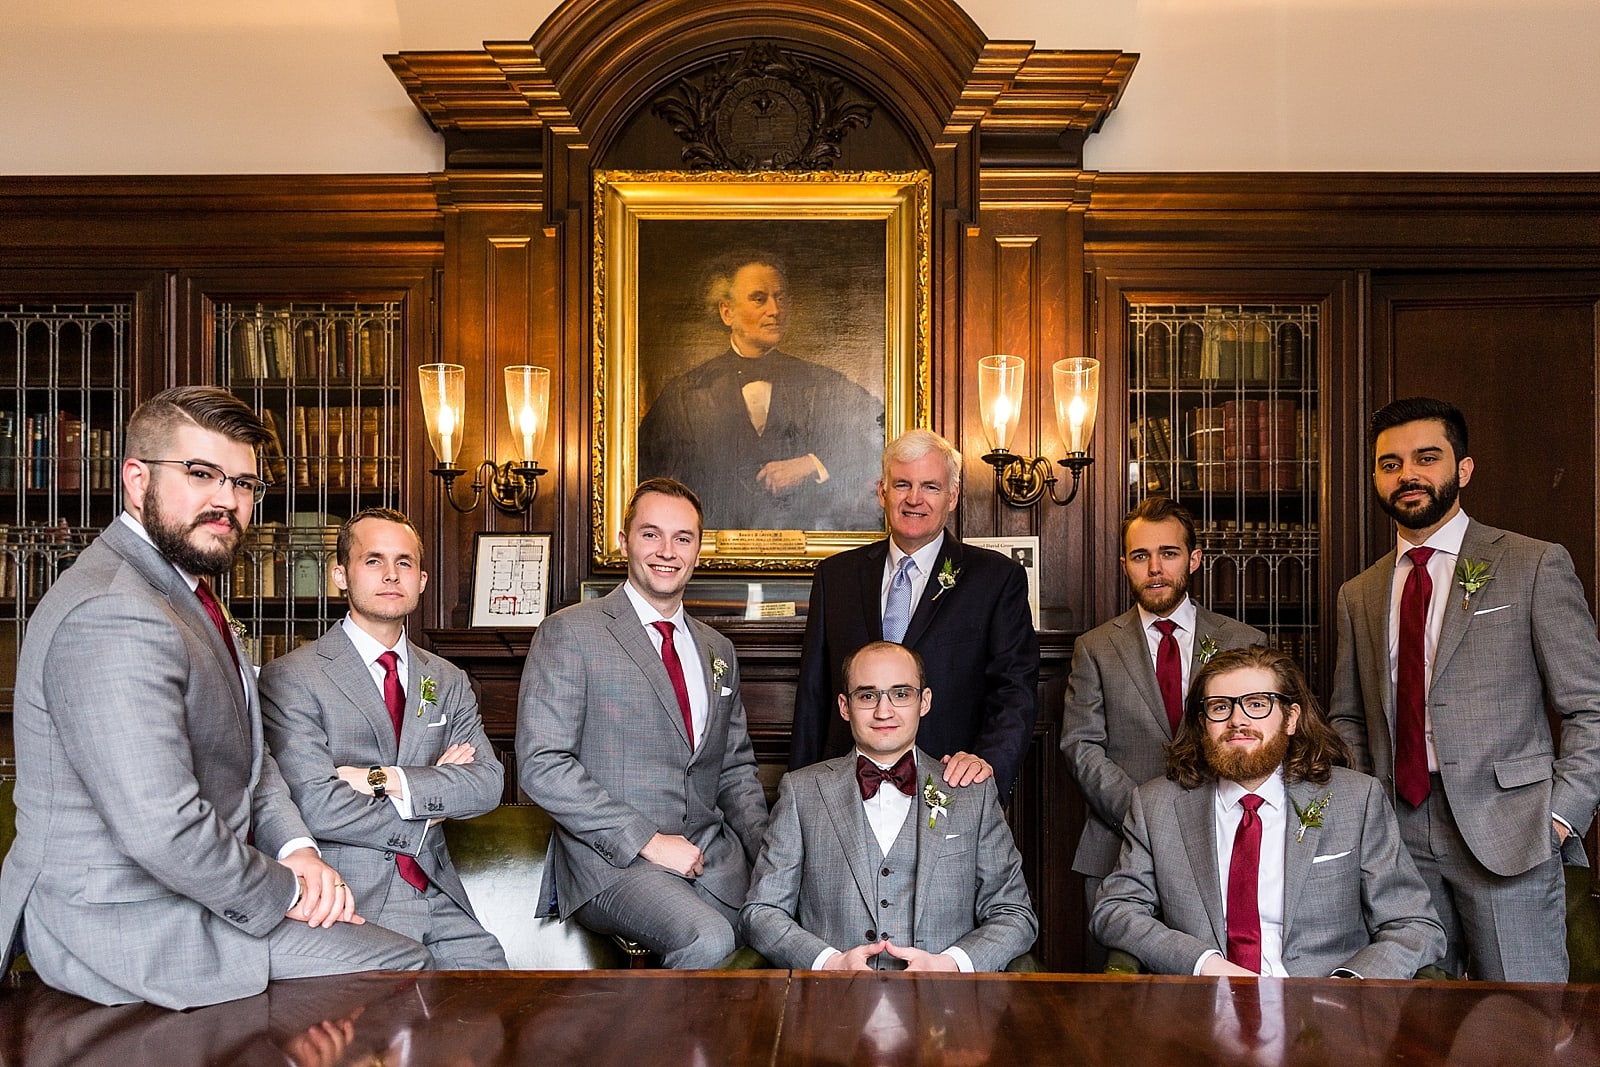 Father of the groom and groomsmen portrait in the College of Physicians 